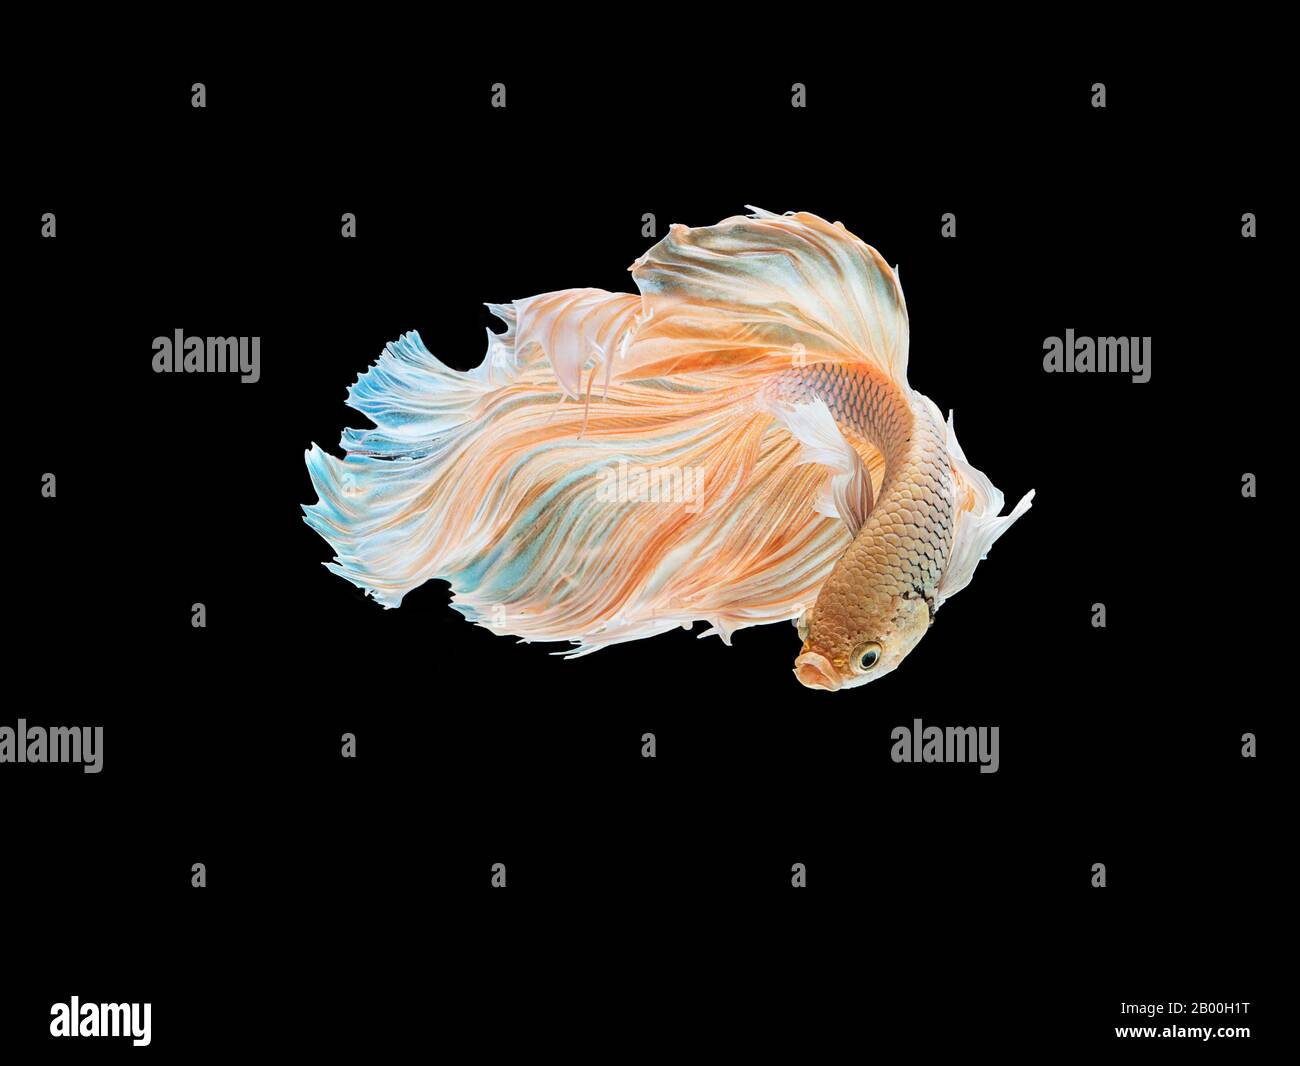 beautiful white Thai fighting fish swimming with long fins and long tail gene. fighting fish isolated on black background. Stock Photo